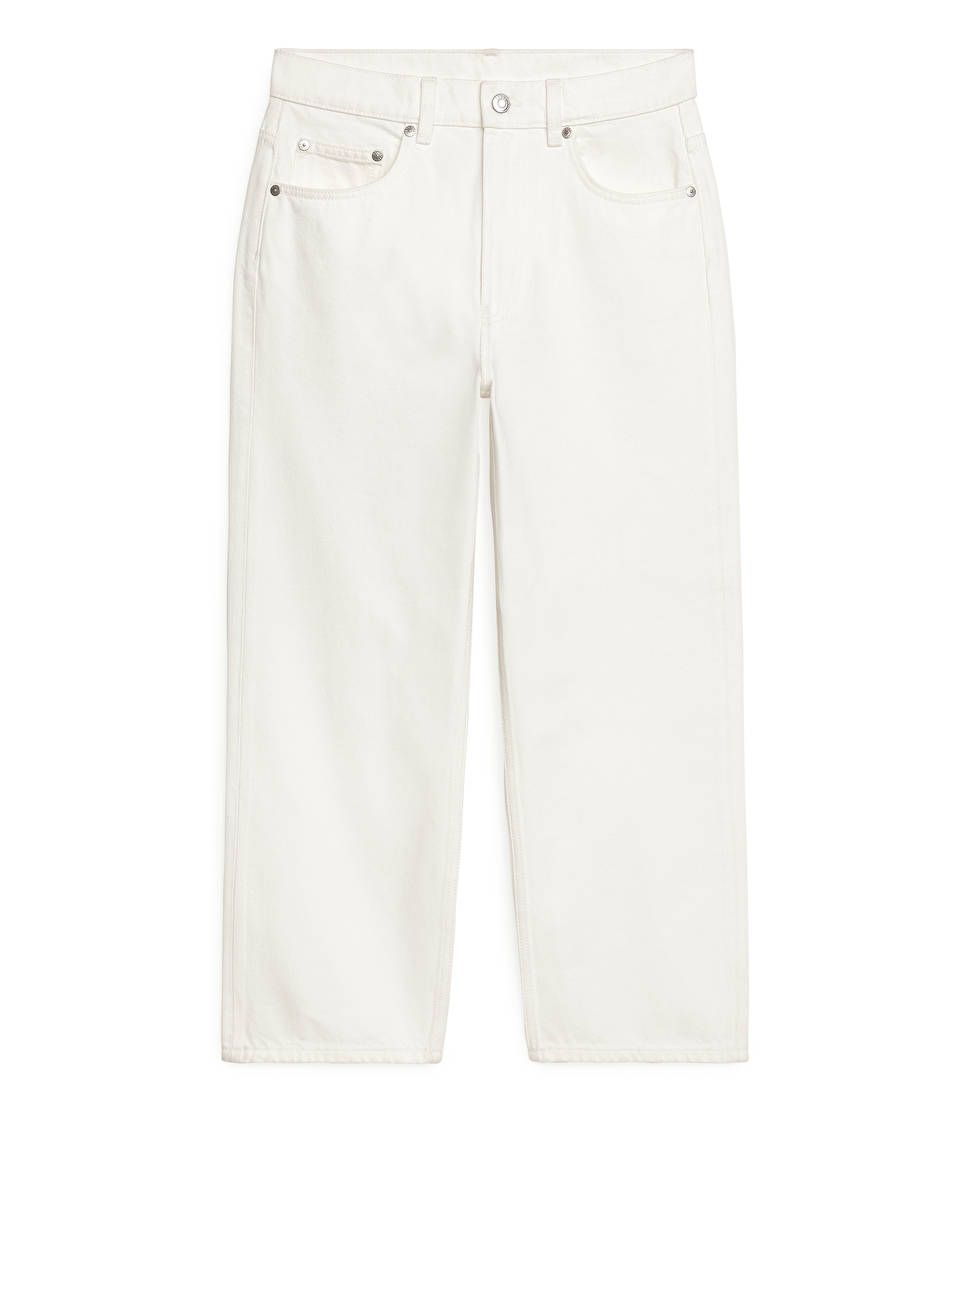 STRAIGHT CROPPED Jeans - Off White - Jeans - ARKET GB | ARKET (US&UK)